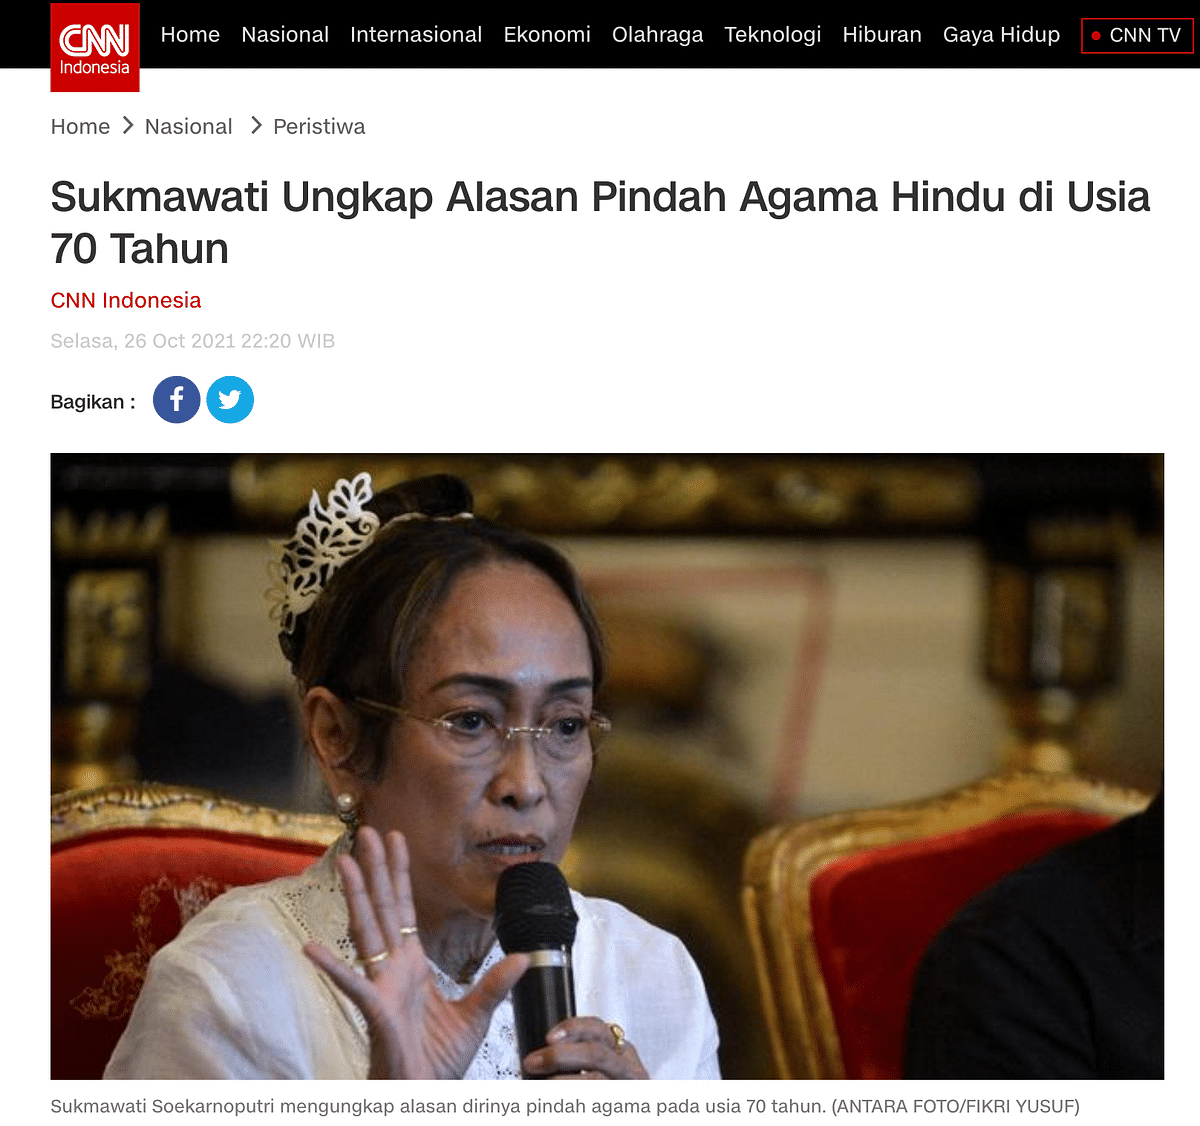 The photo is from 2017 and doesn't show Sukmawati Sukarnoputri converting to Hinduism. 